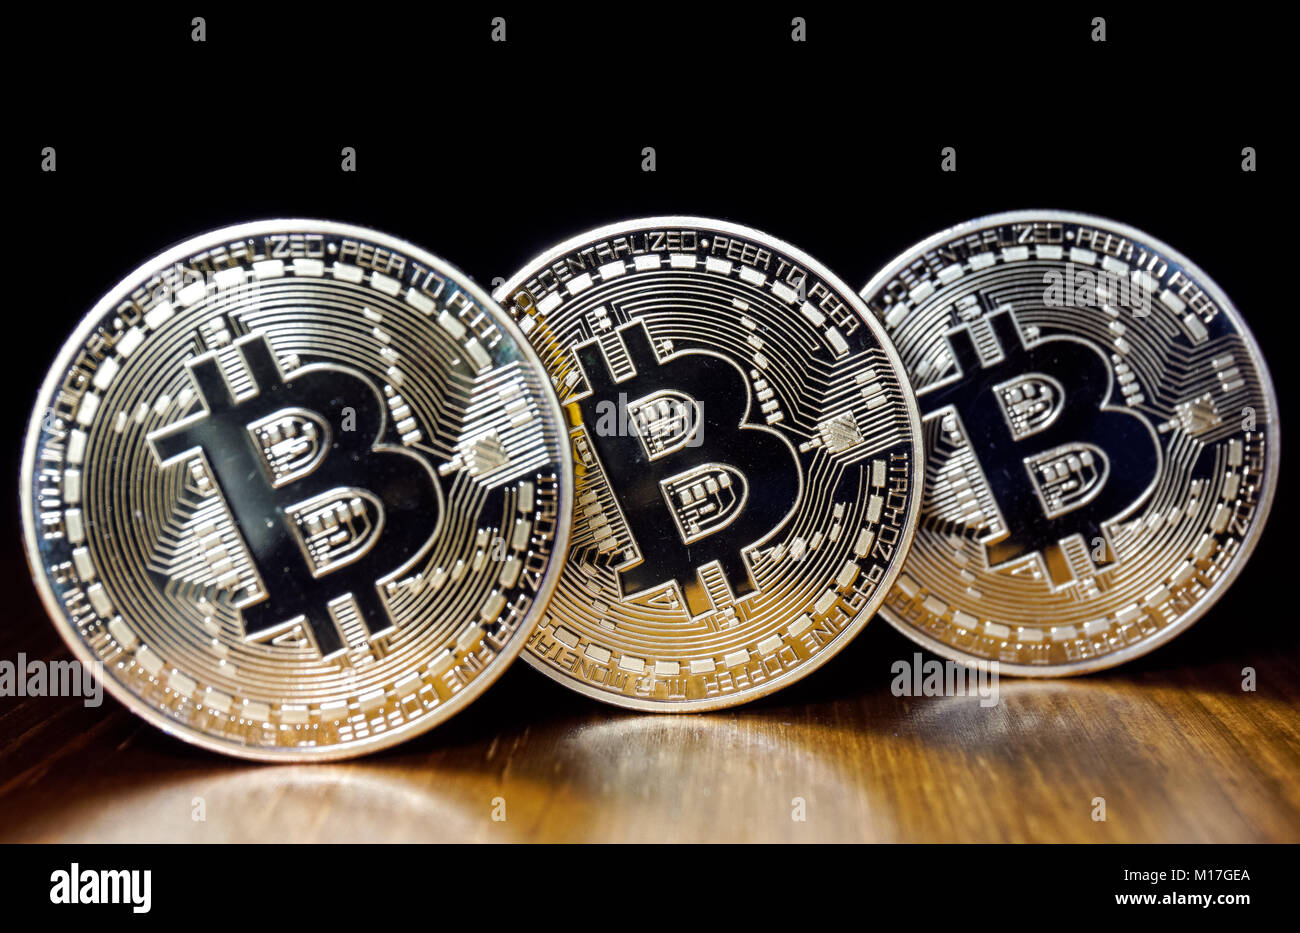 Bitcoin cryptocurrency coins on black background Stock Photo